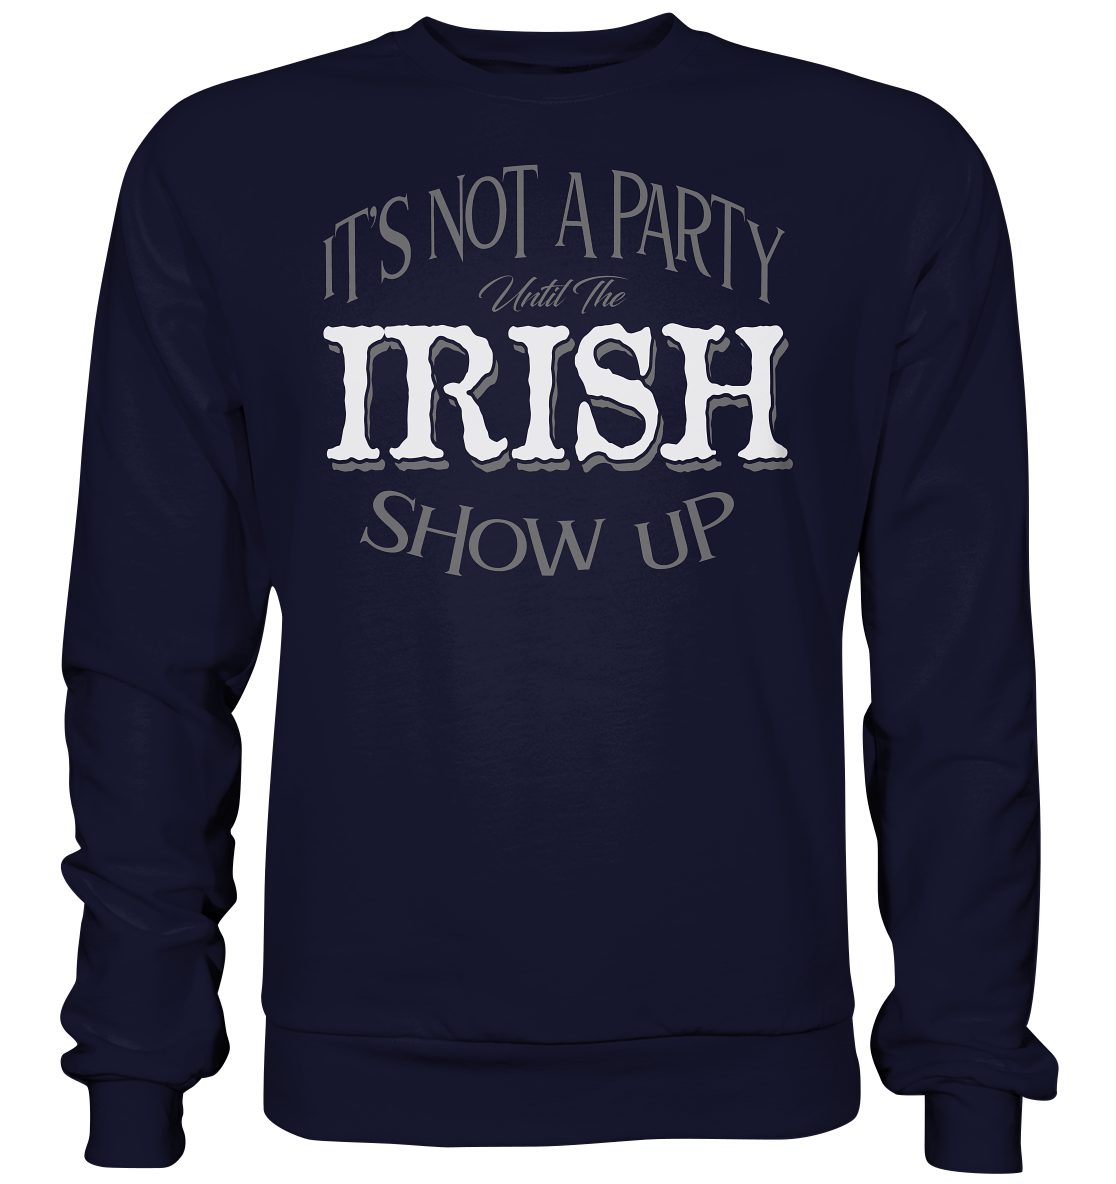 It's Not A Party Until The Irish Show Up - Basic Sweatshirt